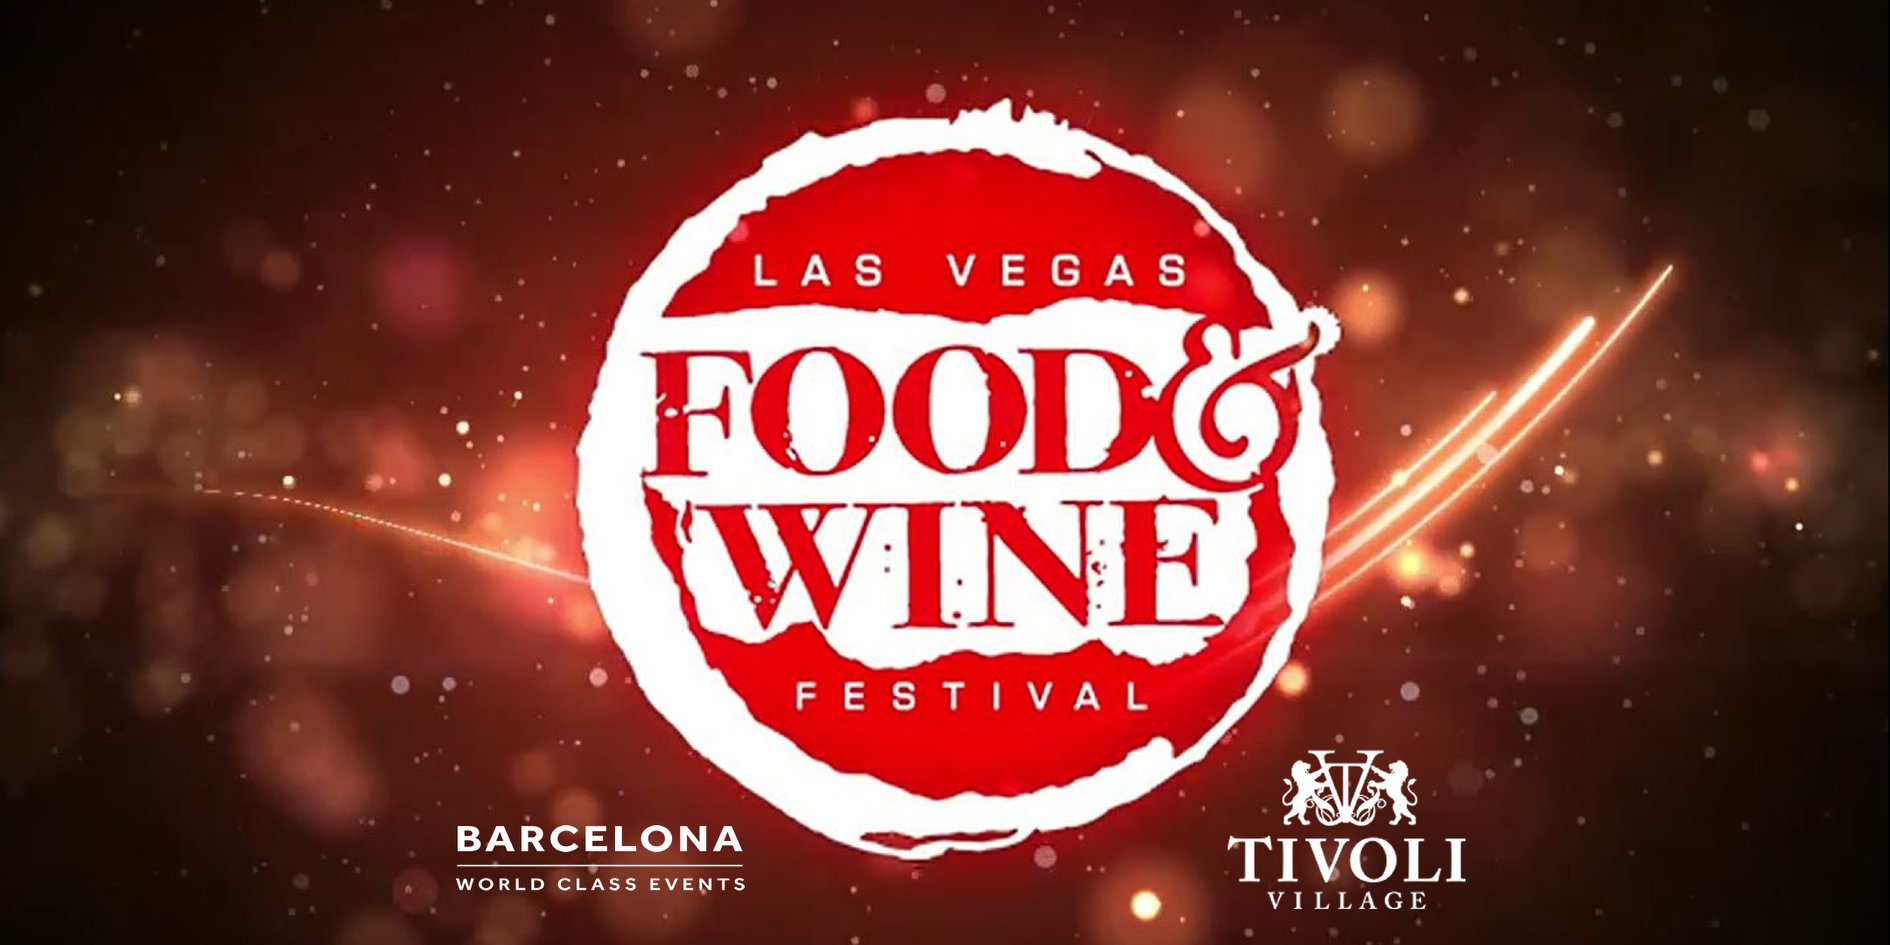 The embodiment of culinary talent will converge at the 10th Annual Las Vegas Food & Wine Festival by featuring celebrity chefs from all over the world.